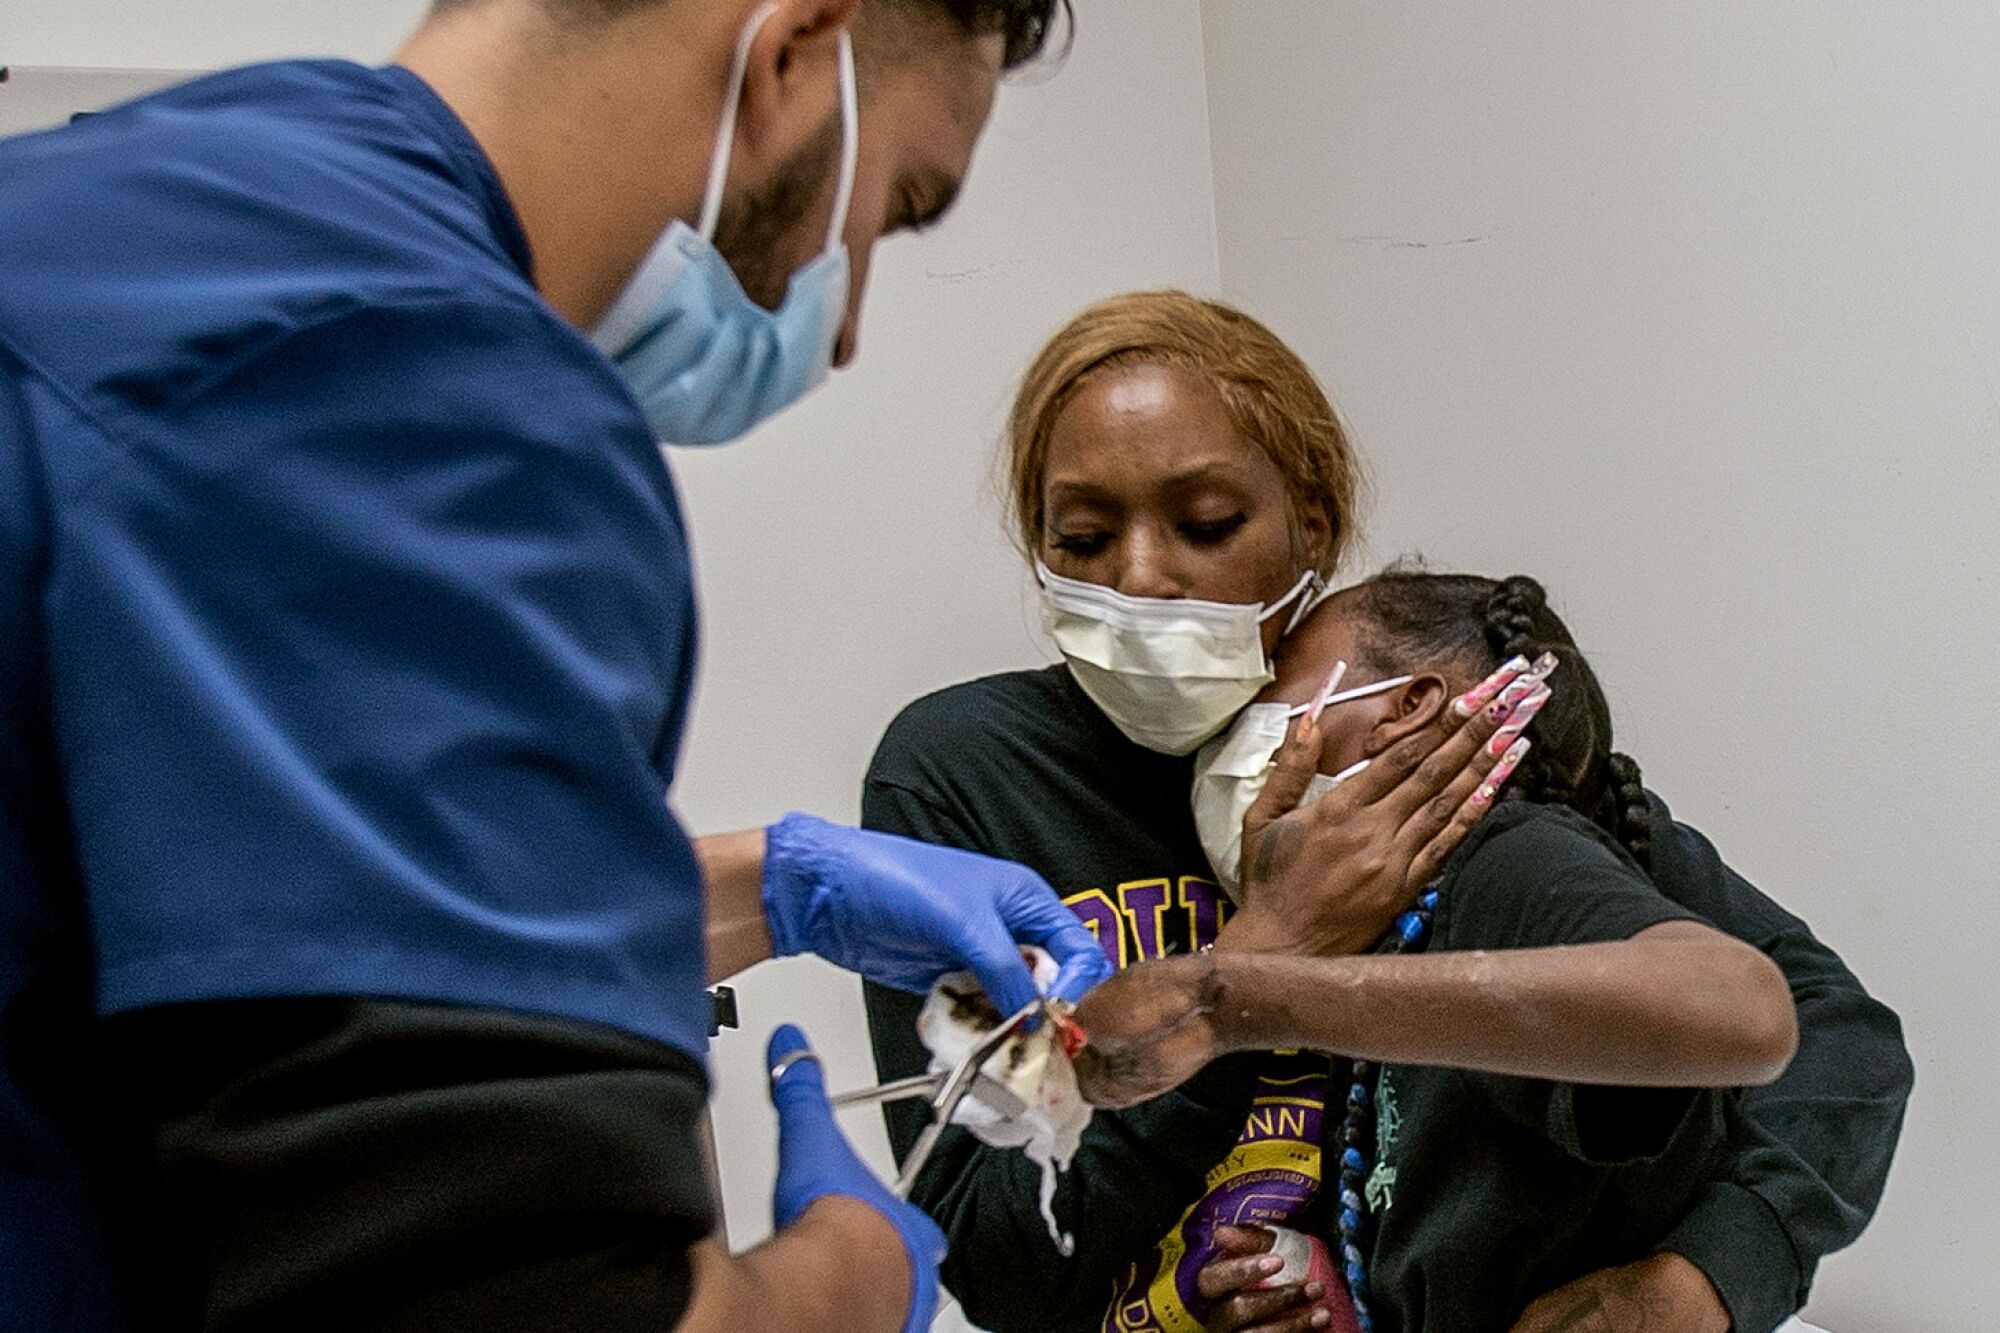 Staneisha Matthews holds tight to her daughter La'Veyah Mosley,12, as a physician's assistant carefully removes a bandage